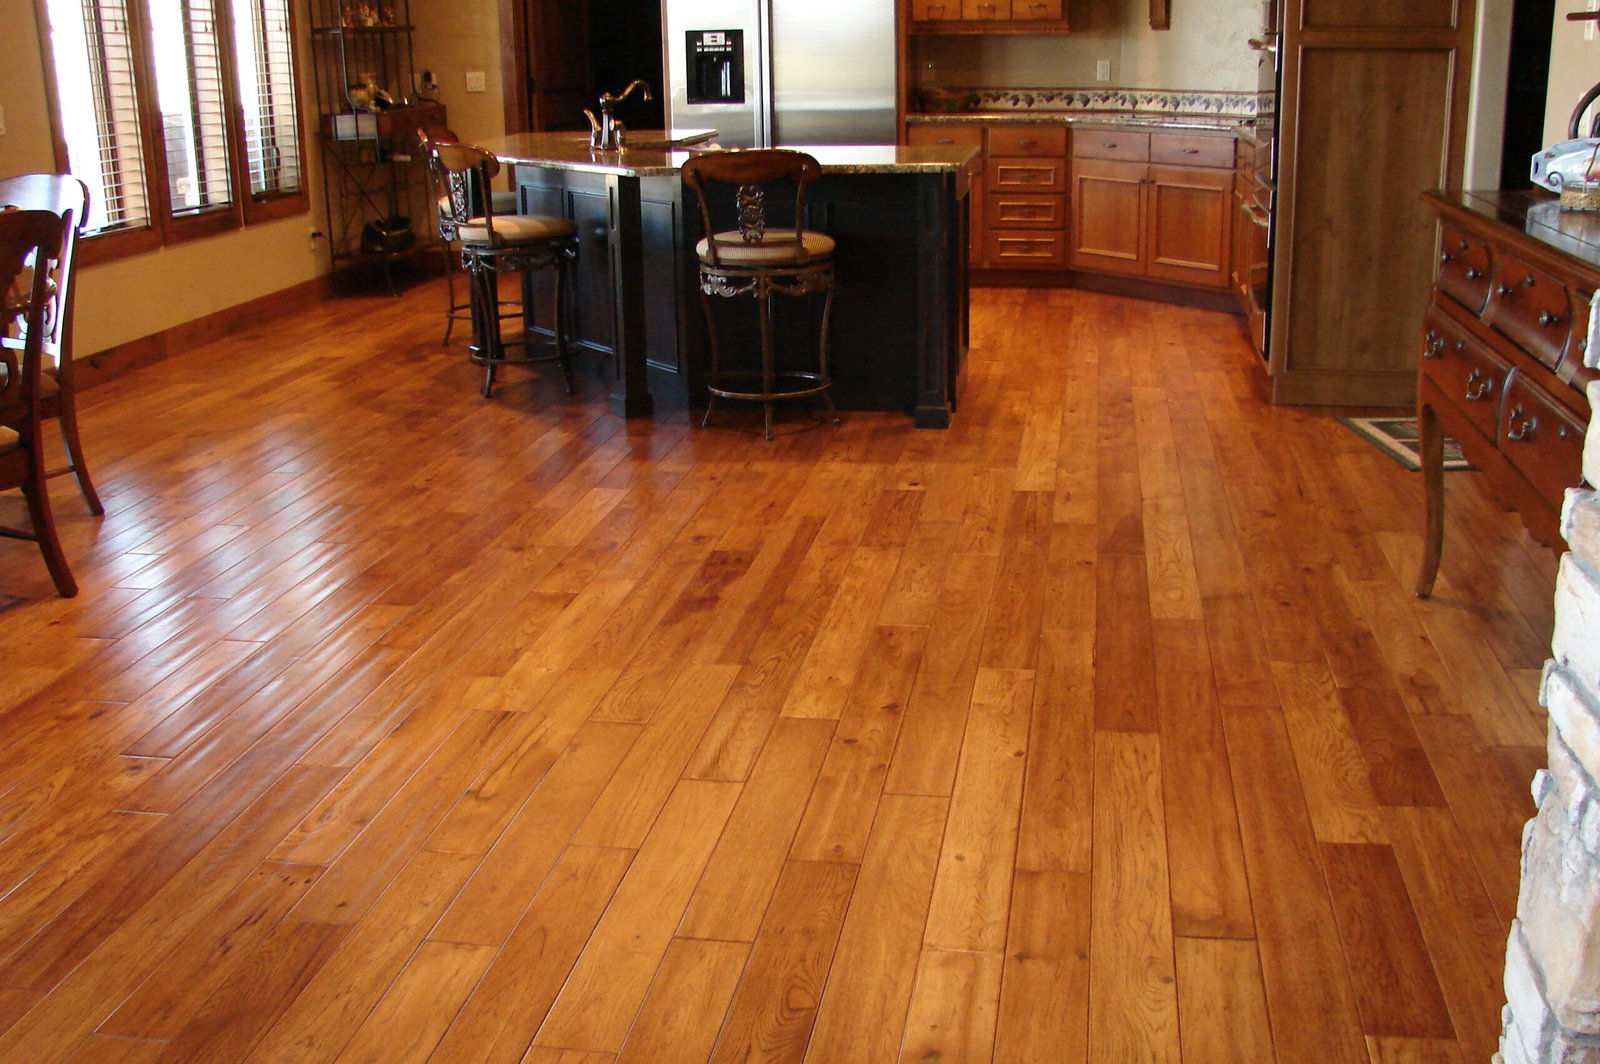 Cost and True Value of Refinishing Timber Floors